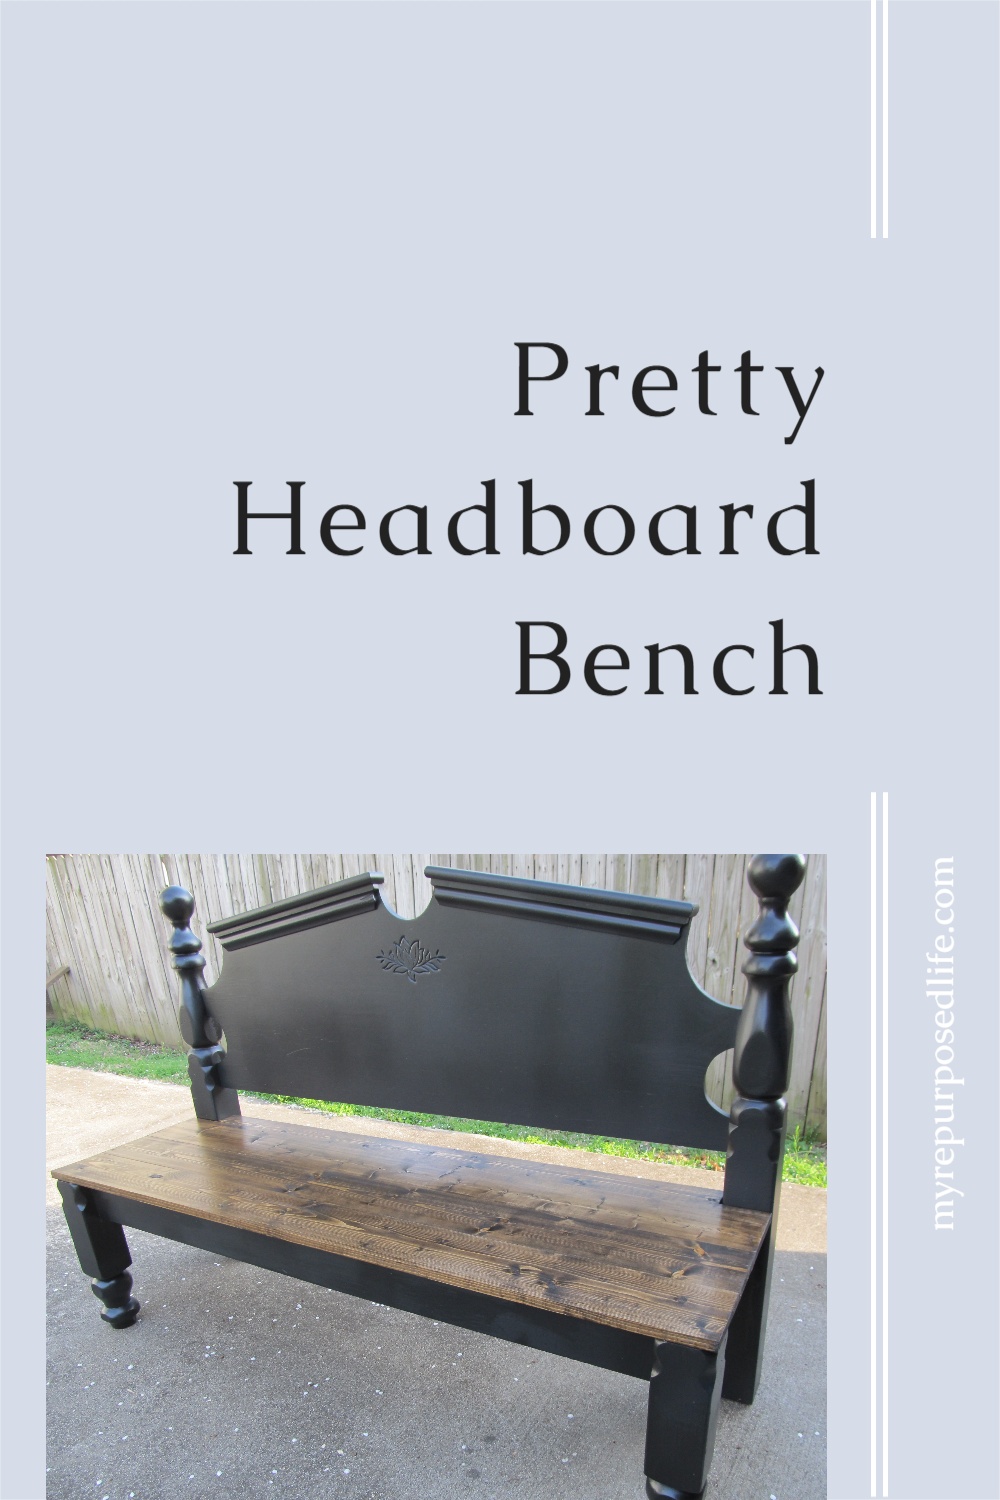 how to make a full sized pretty headboard bench out of a free bed. It's okay to make your bench without arms. Great two-toned black and stain. #MyRepurposedLife #upcycle #repurpose #headboard #bench #diy #weekendproject via @repurposedlife